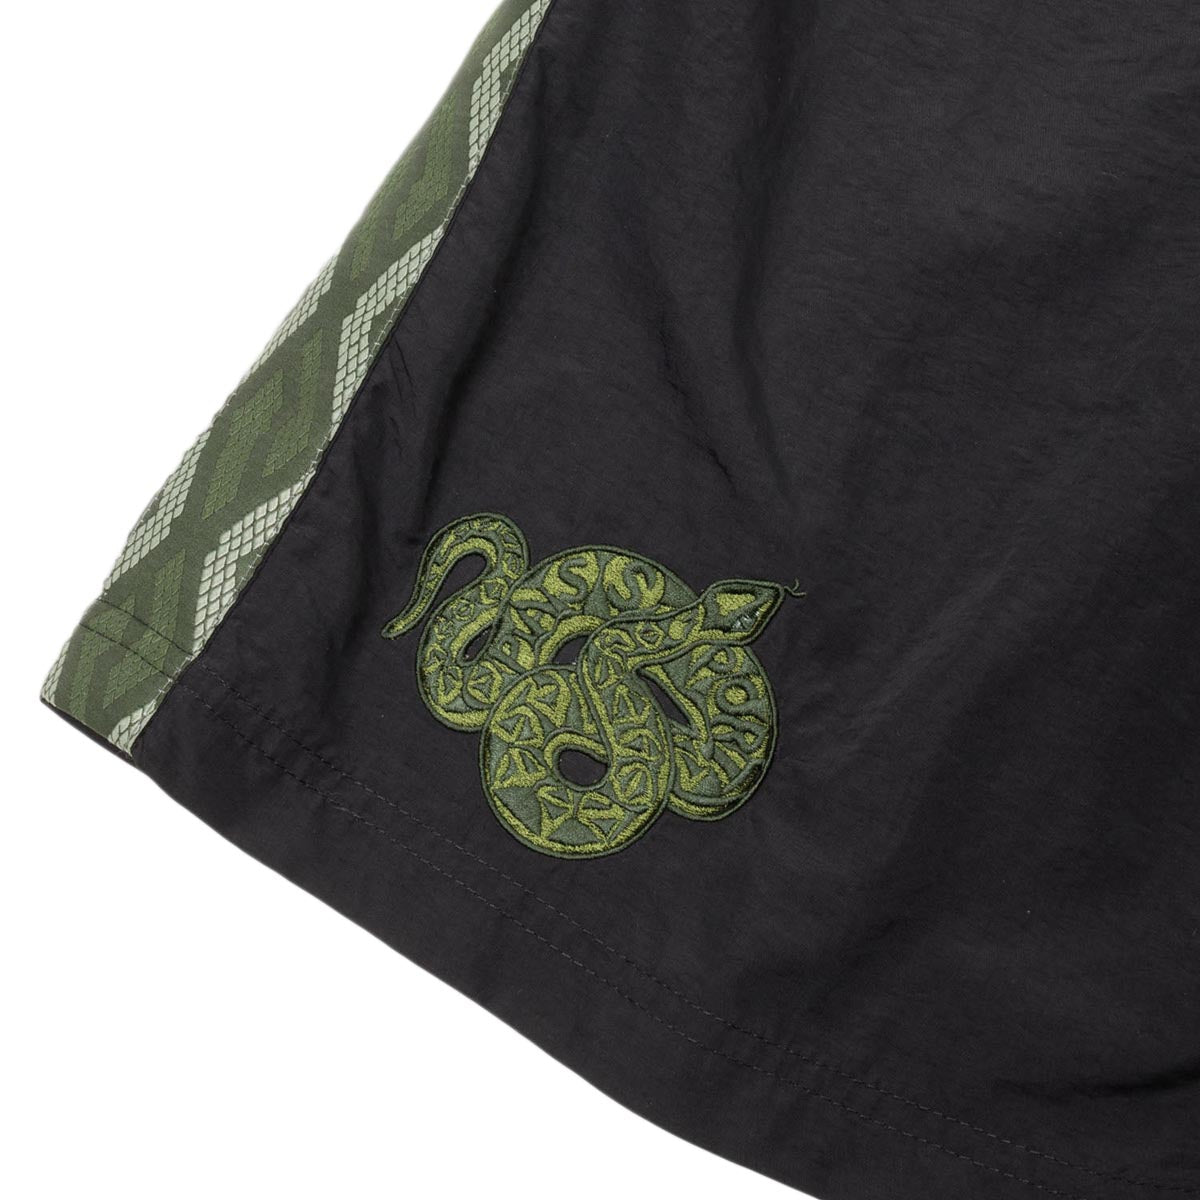 Passport Coiled RPET Casual Shorts - Black image 2